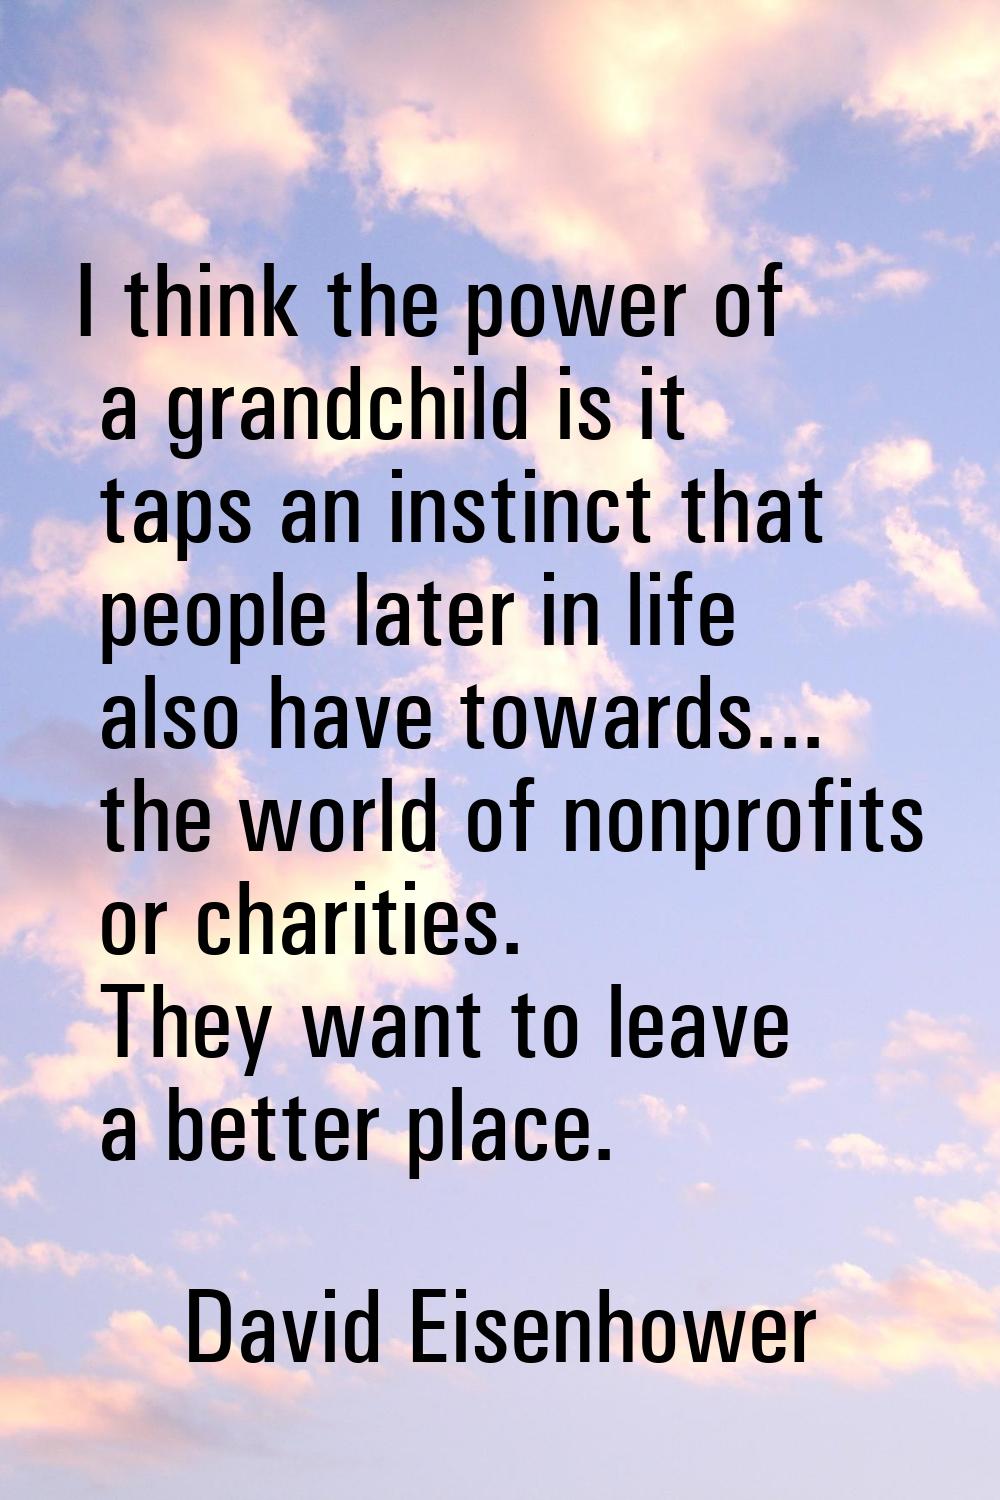 I think the power of a grandchild is it taps an instinct that people later in life also have toward